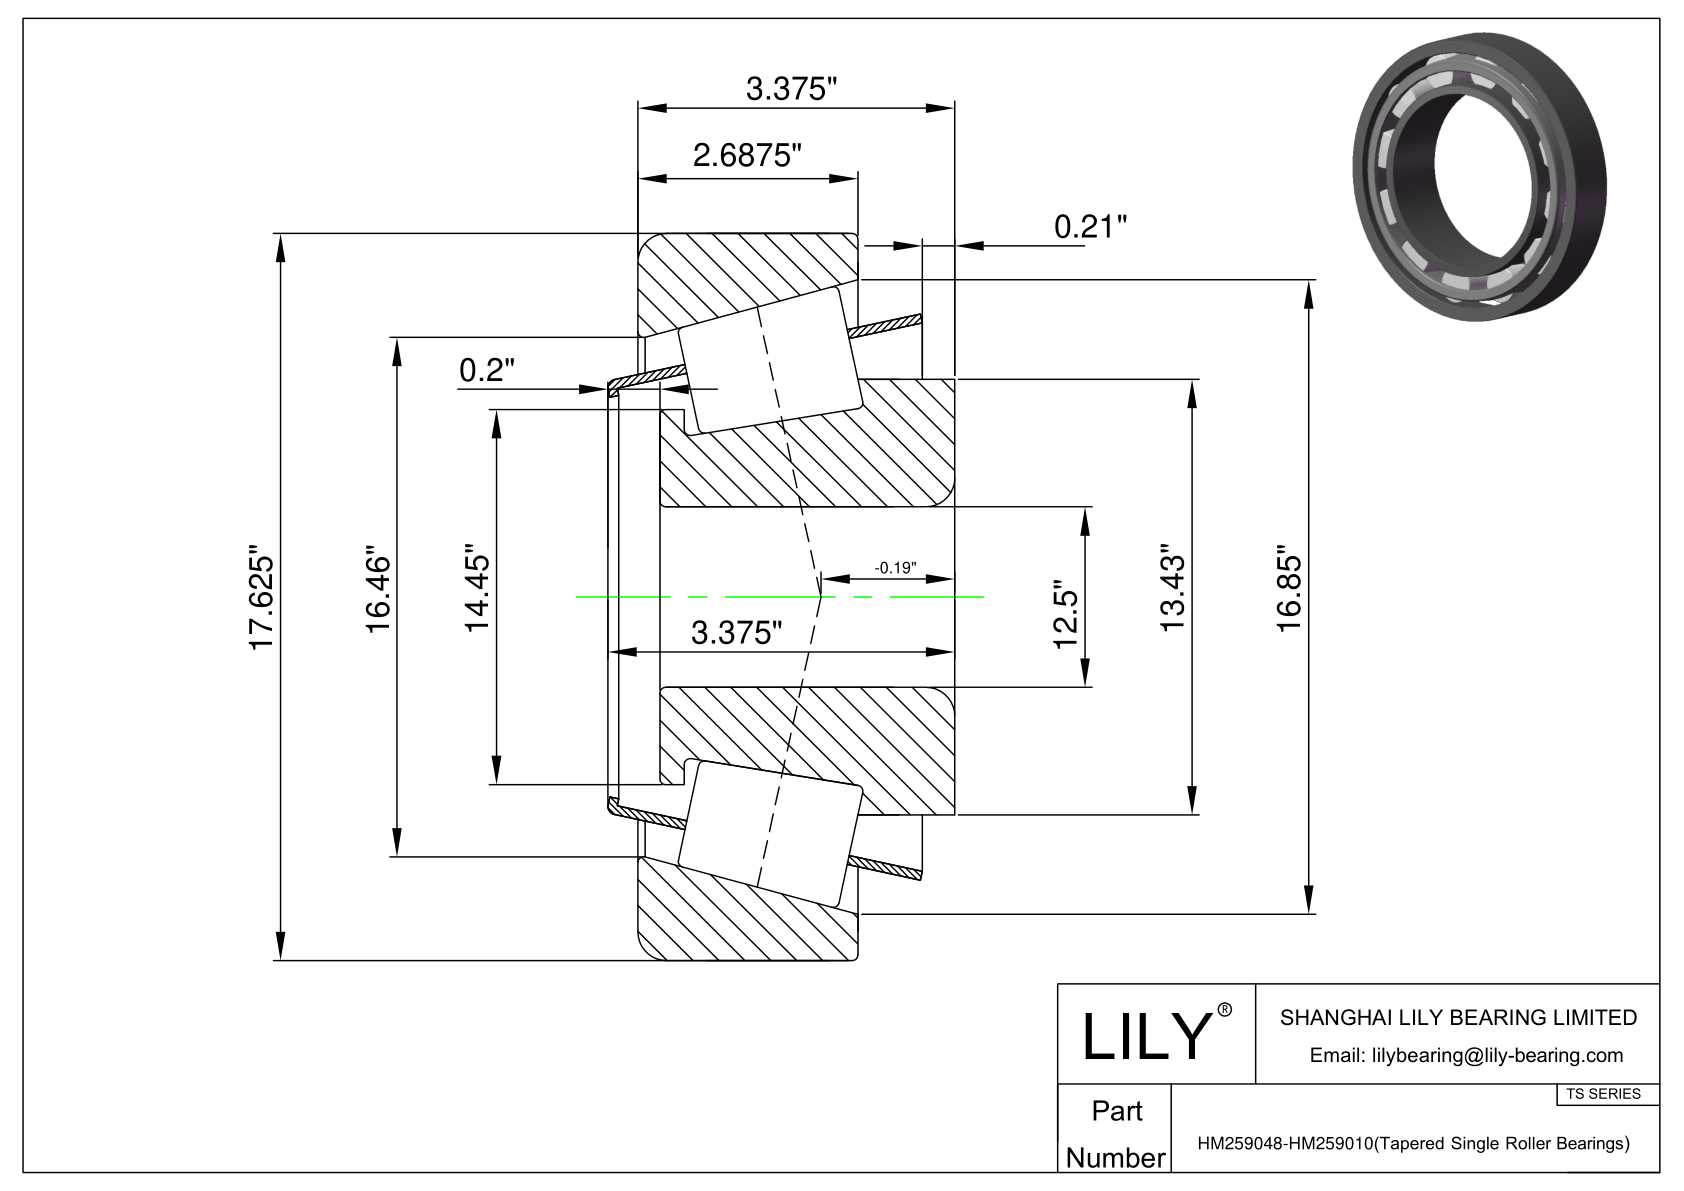 HM259048-HM259010 TS (Tapered Single Roller Bearings) (Imperial) cad drawing